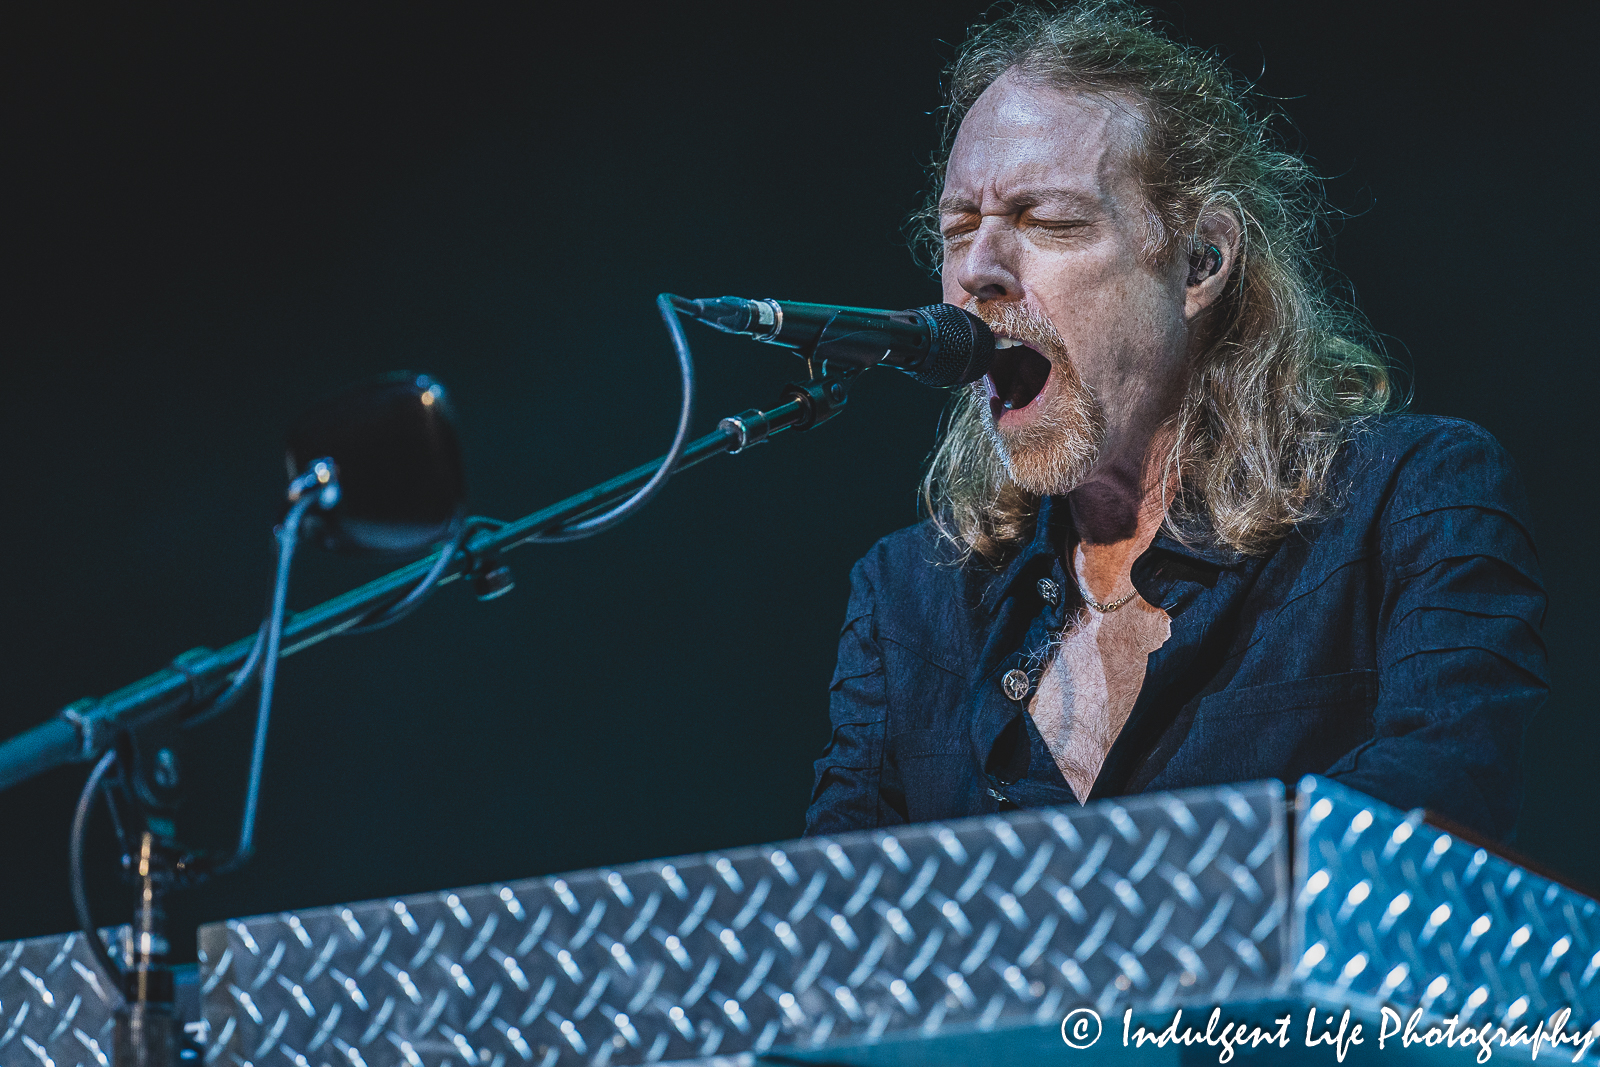 Foreigner's Jeff Pilson playing "Cold as Ice" on the keyboard live during "The Historic Farewell Tour" at Kansas City's Starlight Theatre on July 18, 2023.